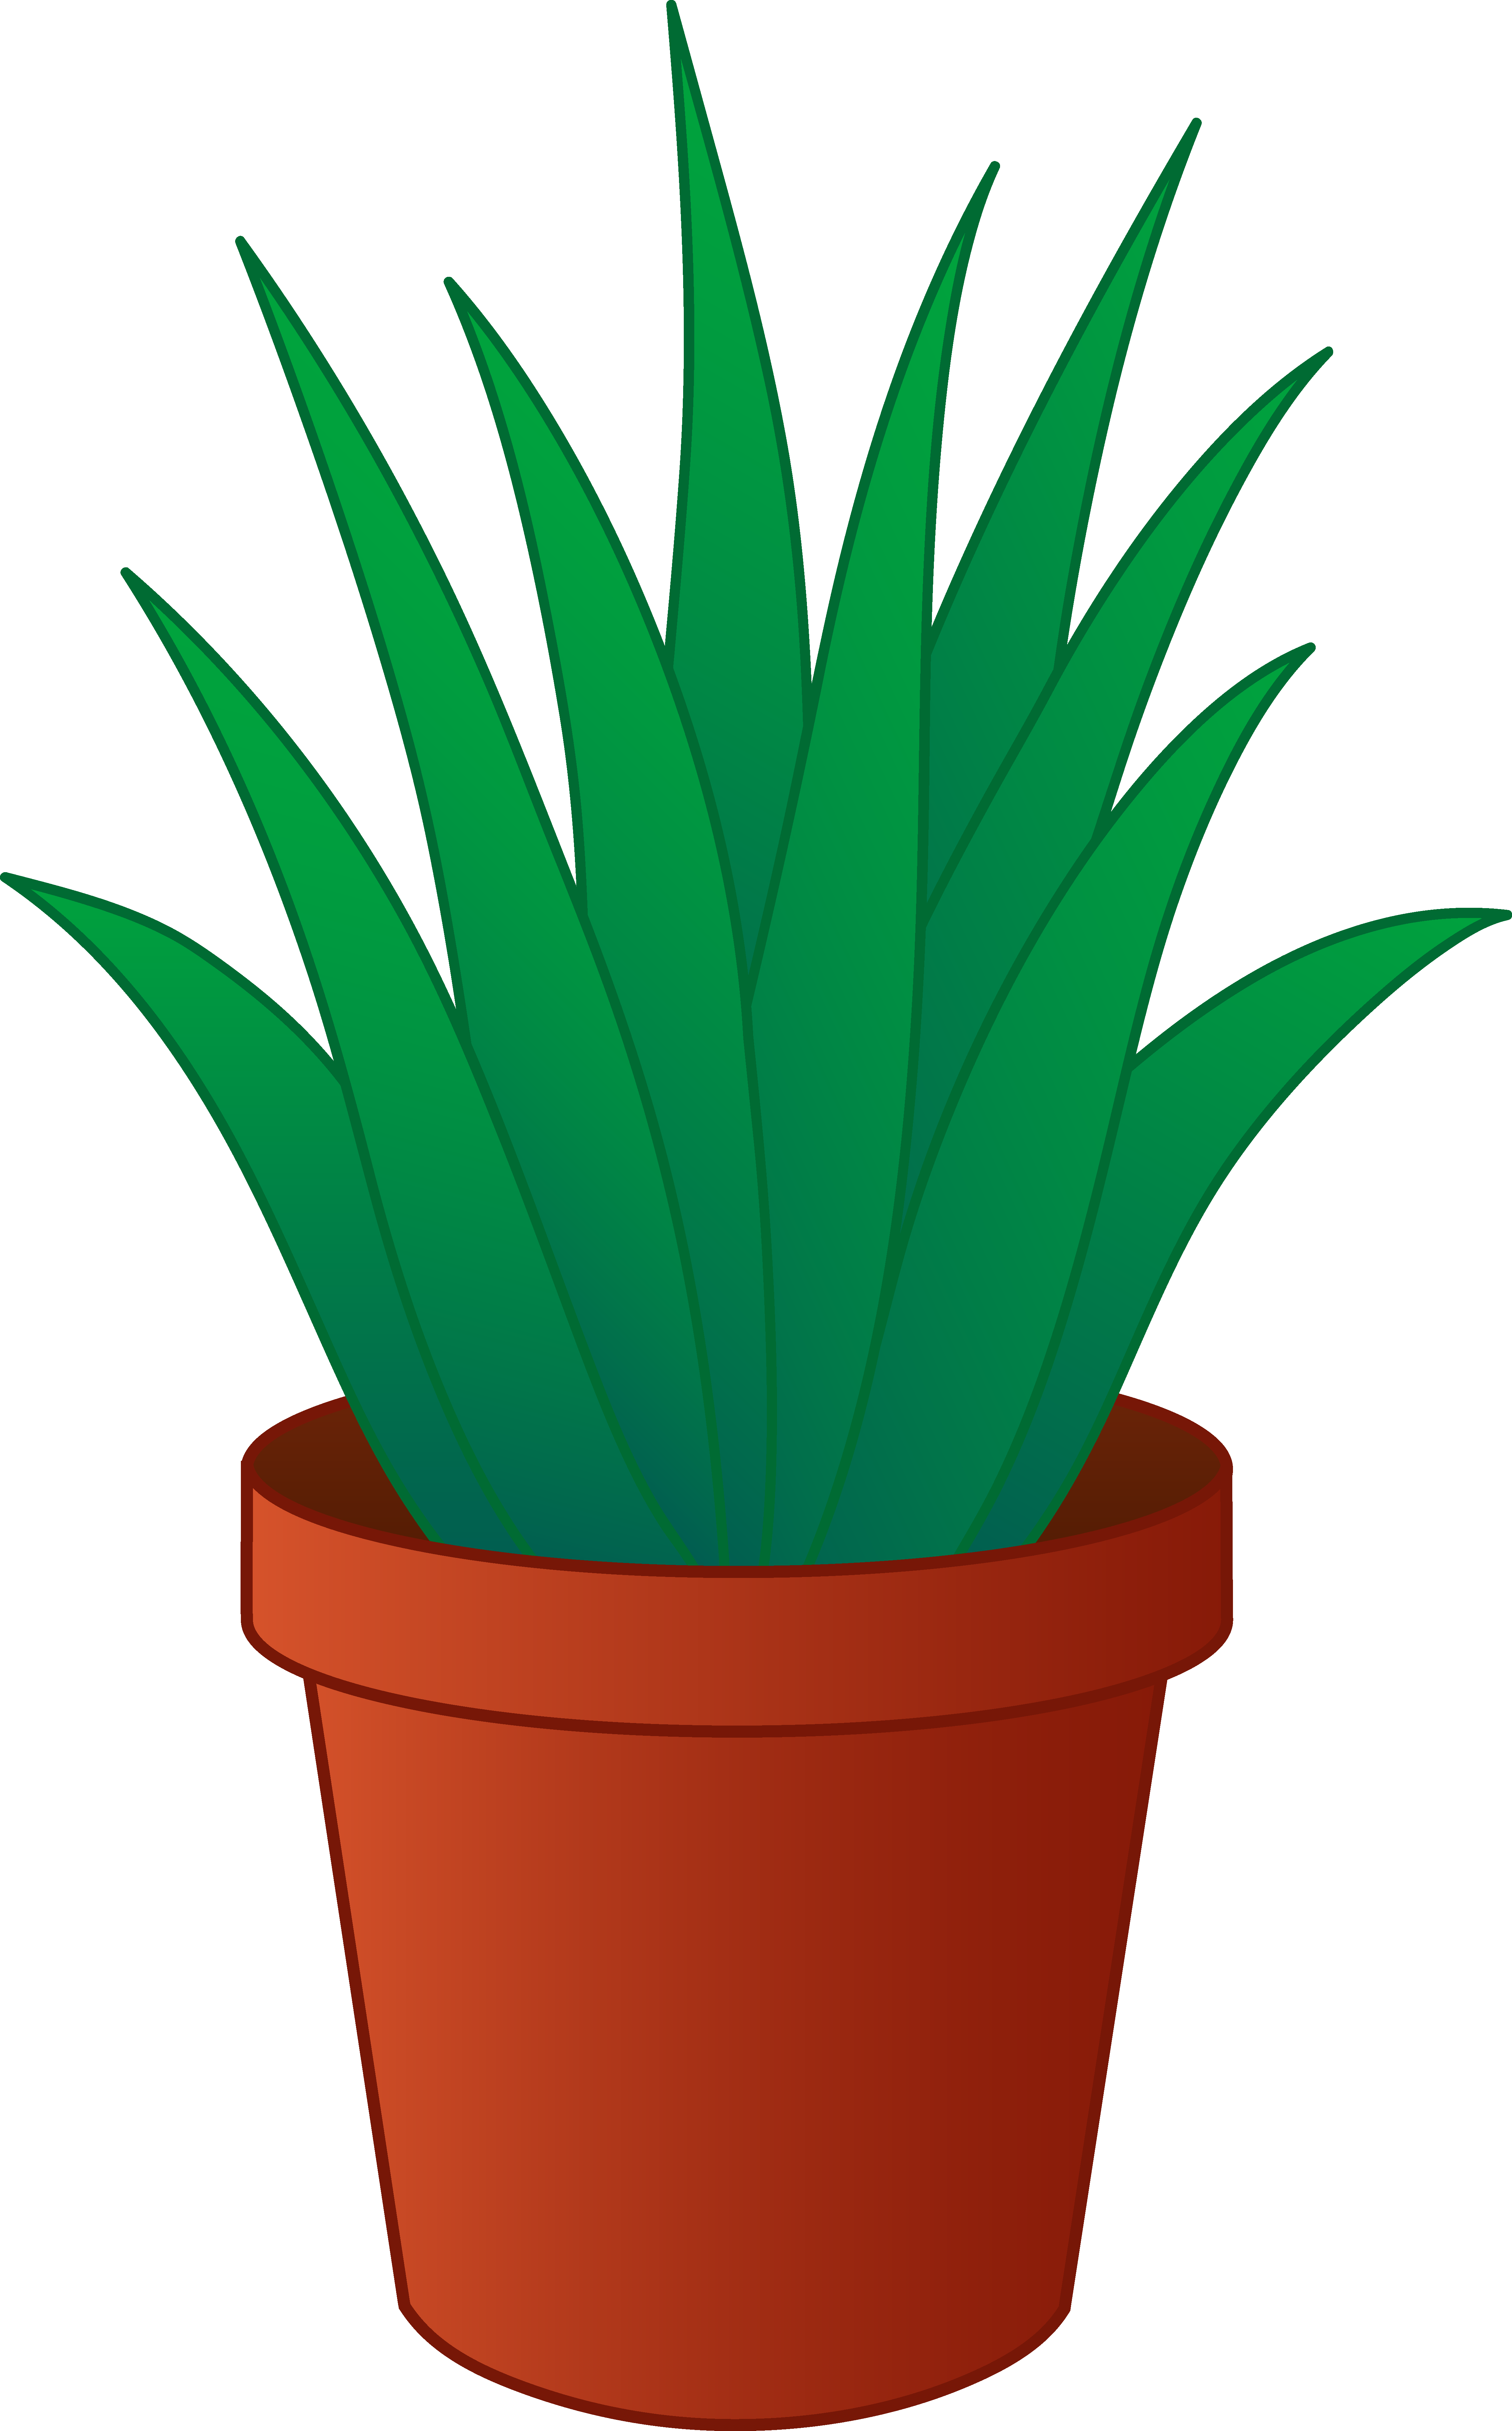 Plant Clipart Free | Clipart Panda - Free Clipart Images